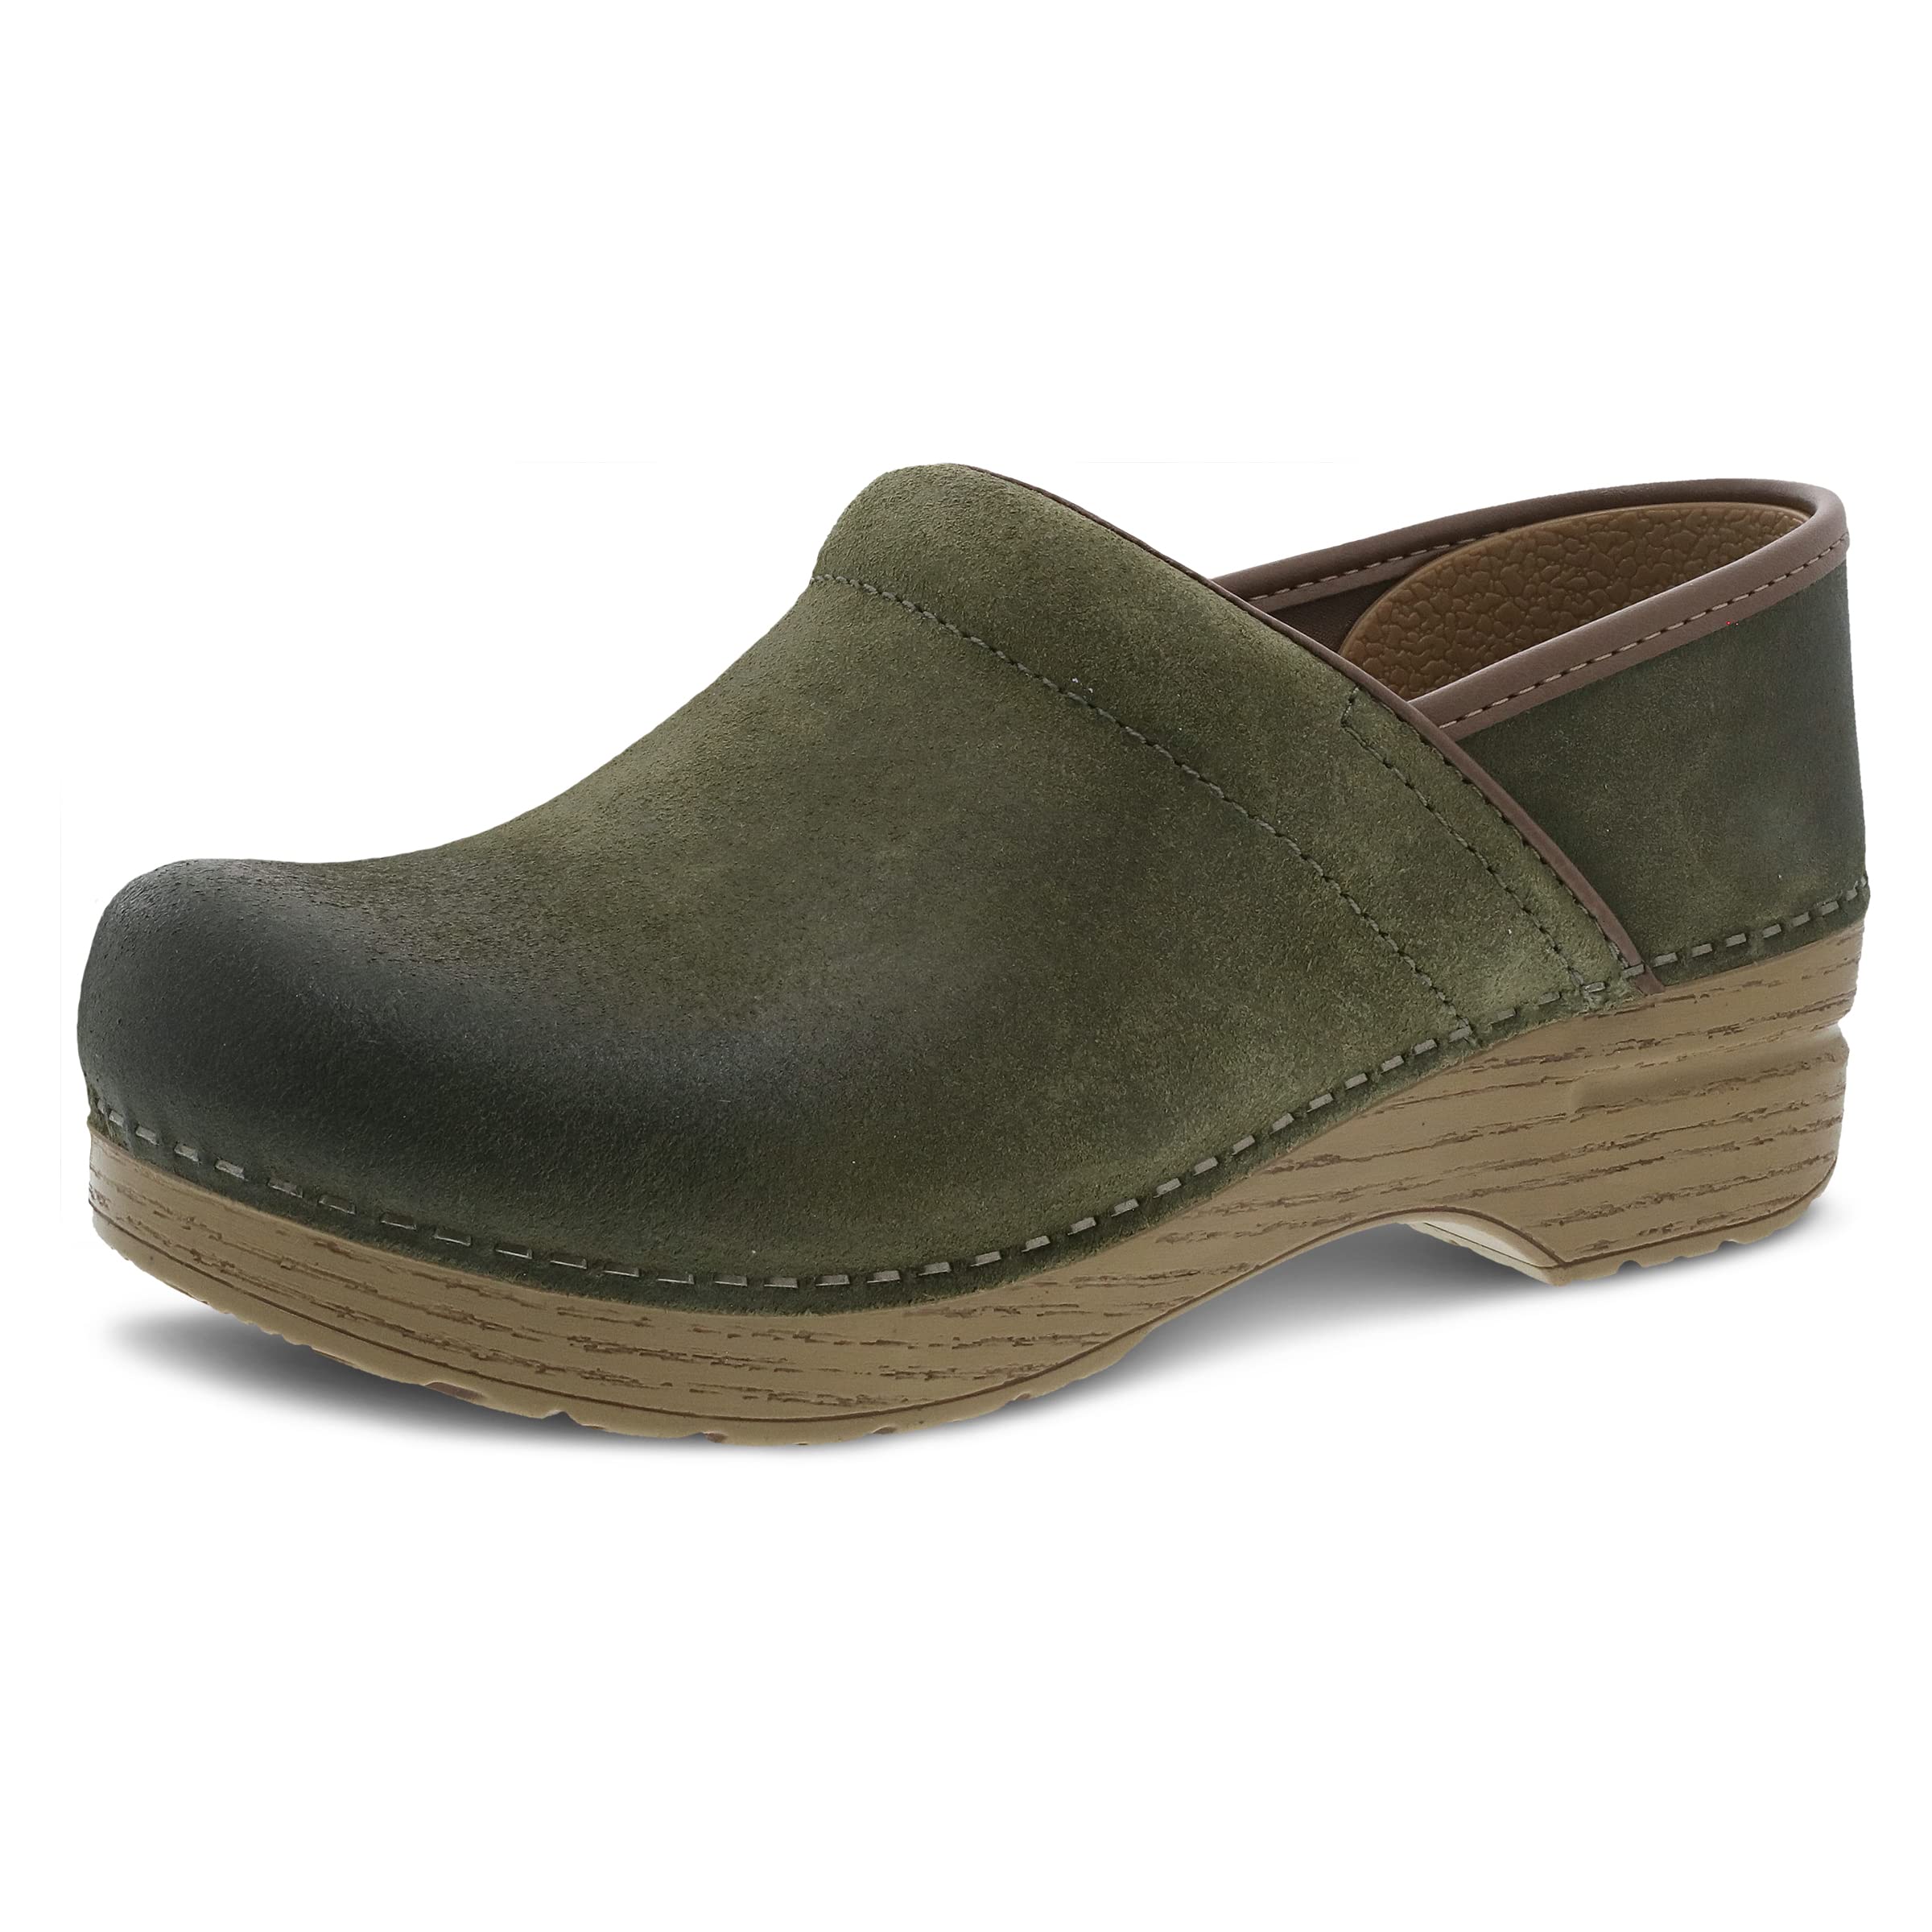 Dansko Professional Slip-On Clogs for Women – Rocker Sole and Arch Support for Comfort – Ideal for Long Standing Professionals – Nursing, Veterinarians, Food Service, Healthcare Professionals